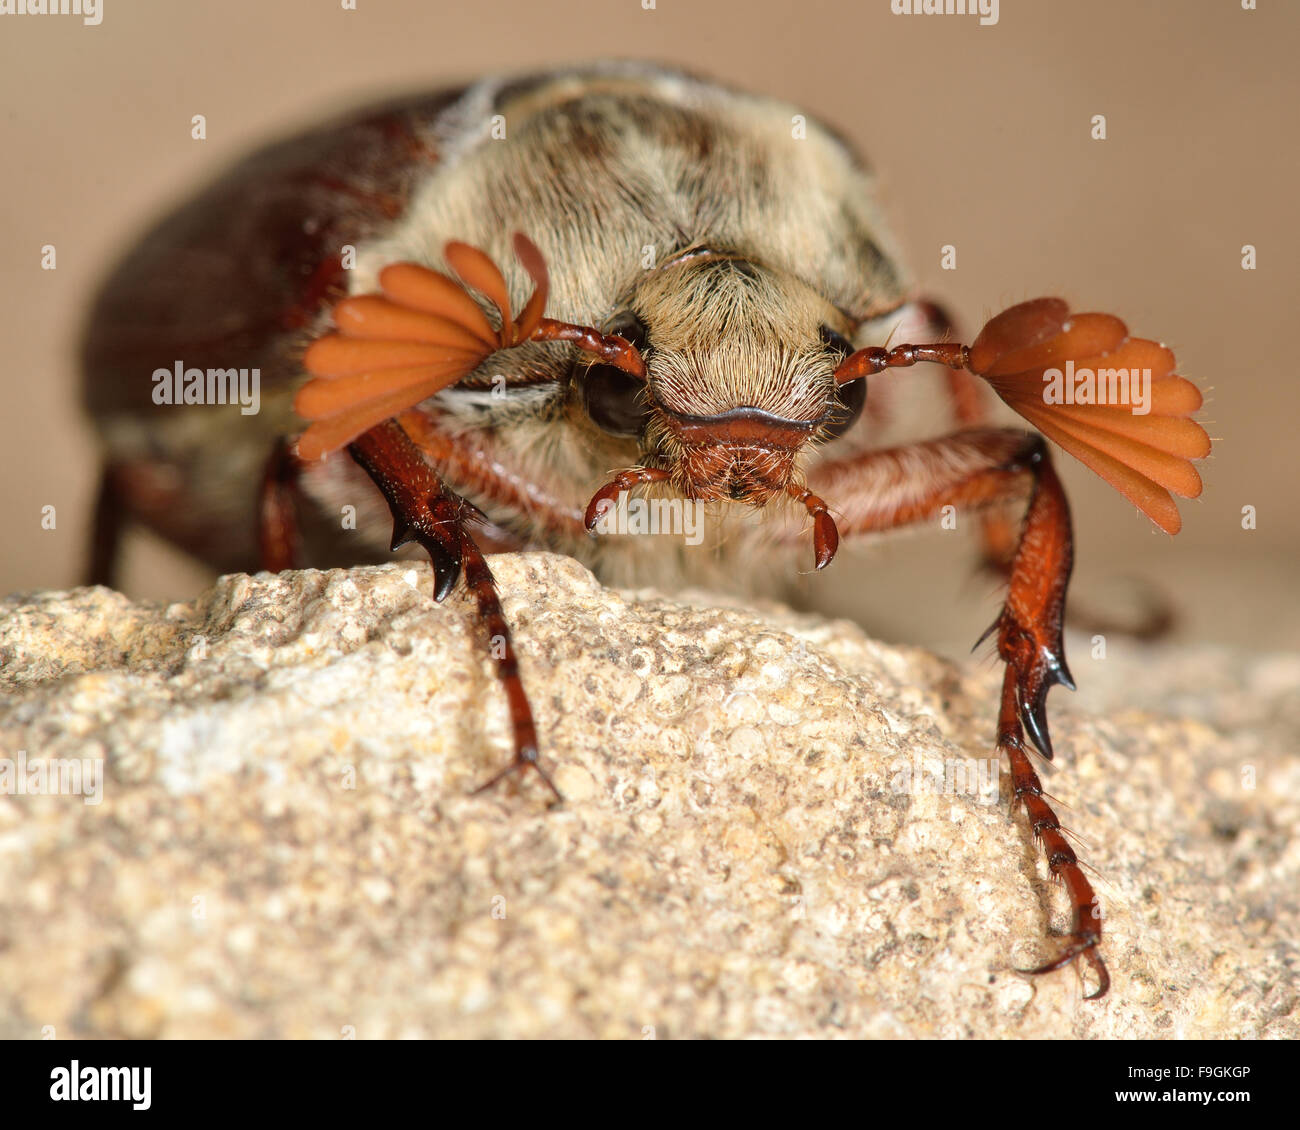 Cockchafer (Melolontha melolontha).  A head-on photograph of a cockchafer beetle covered in hair, with antennae spread open Stock Photo